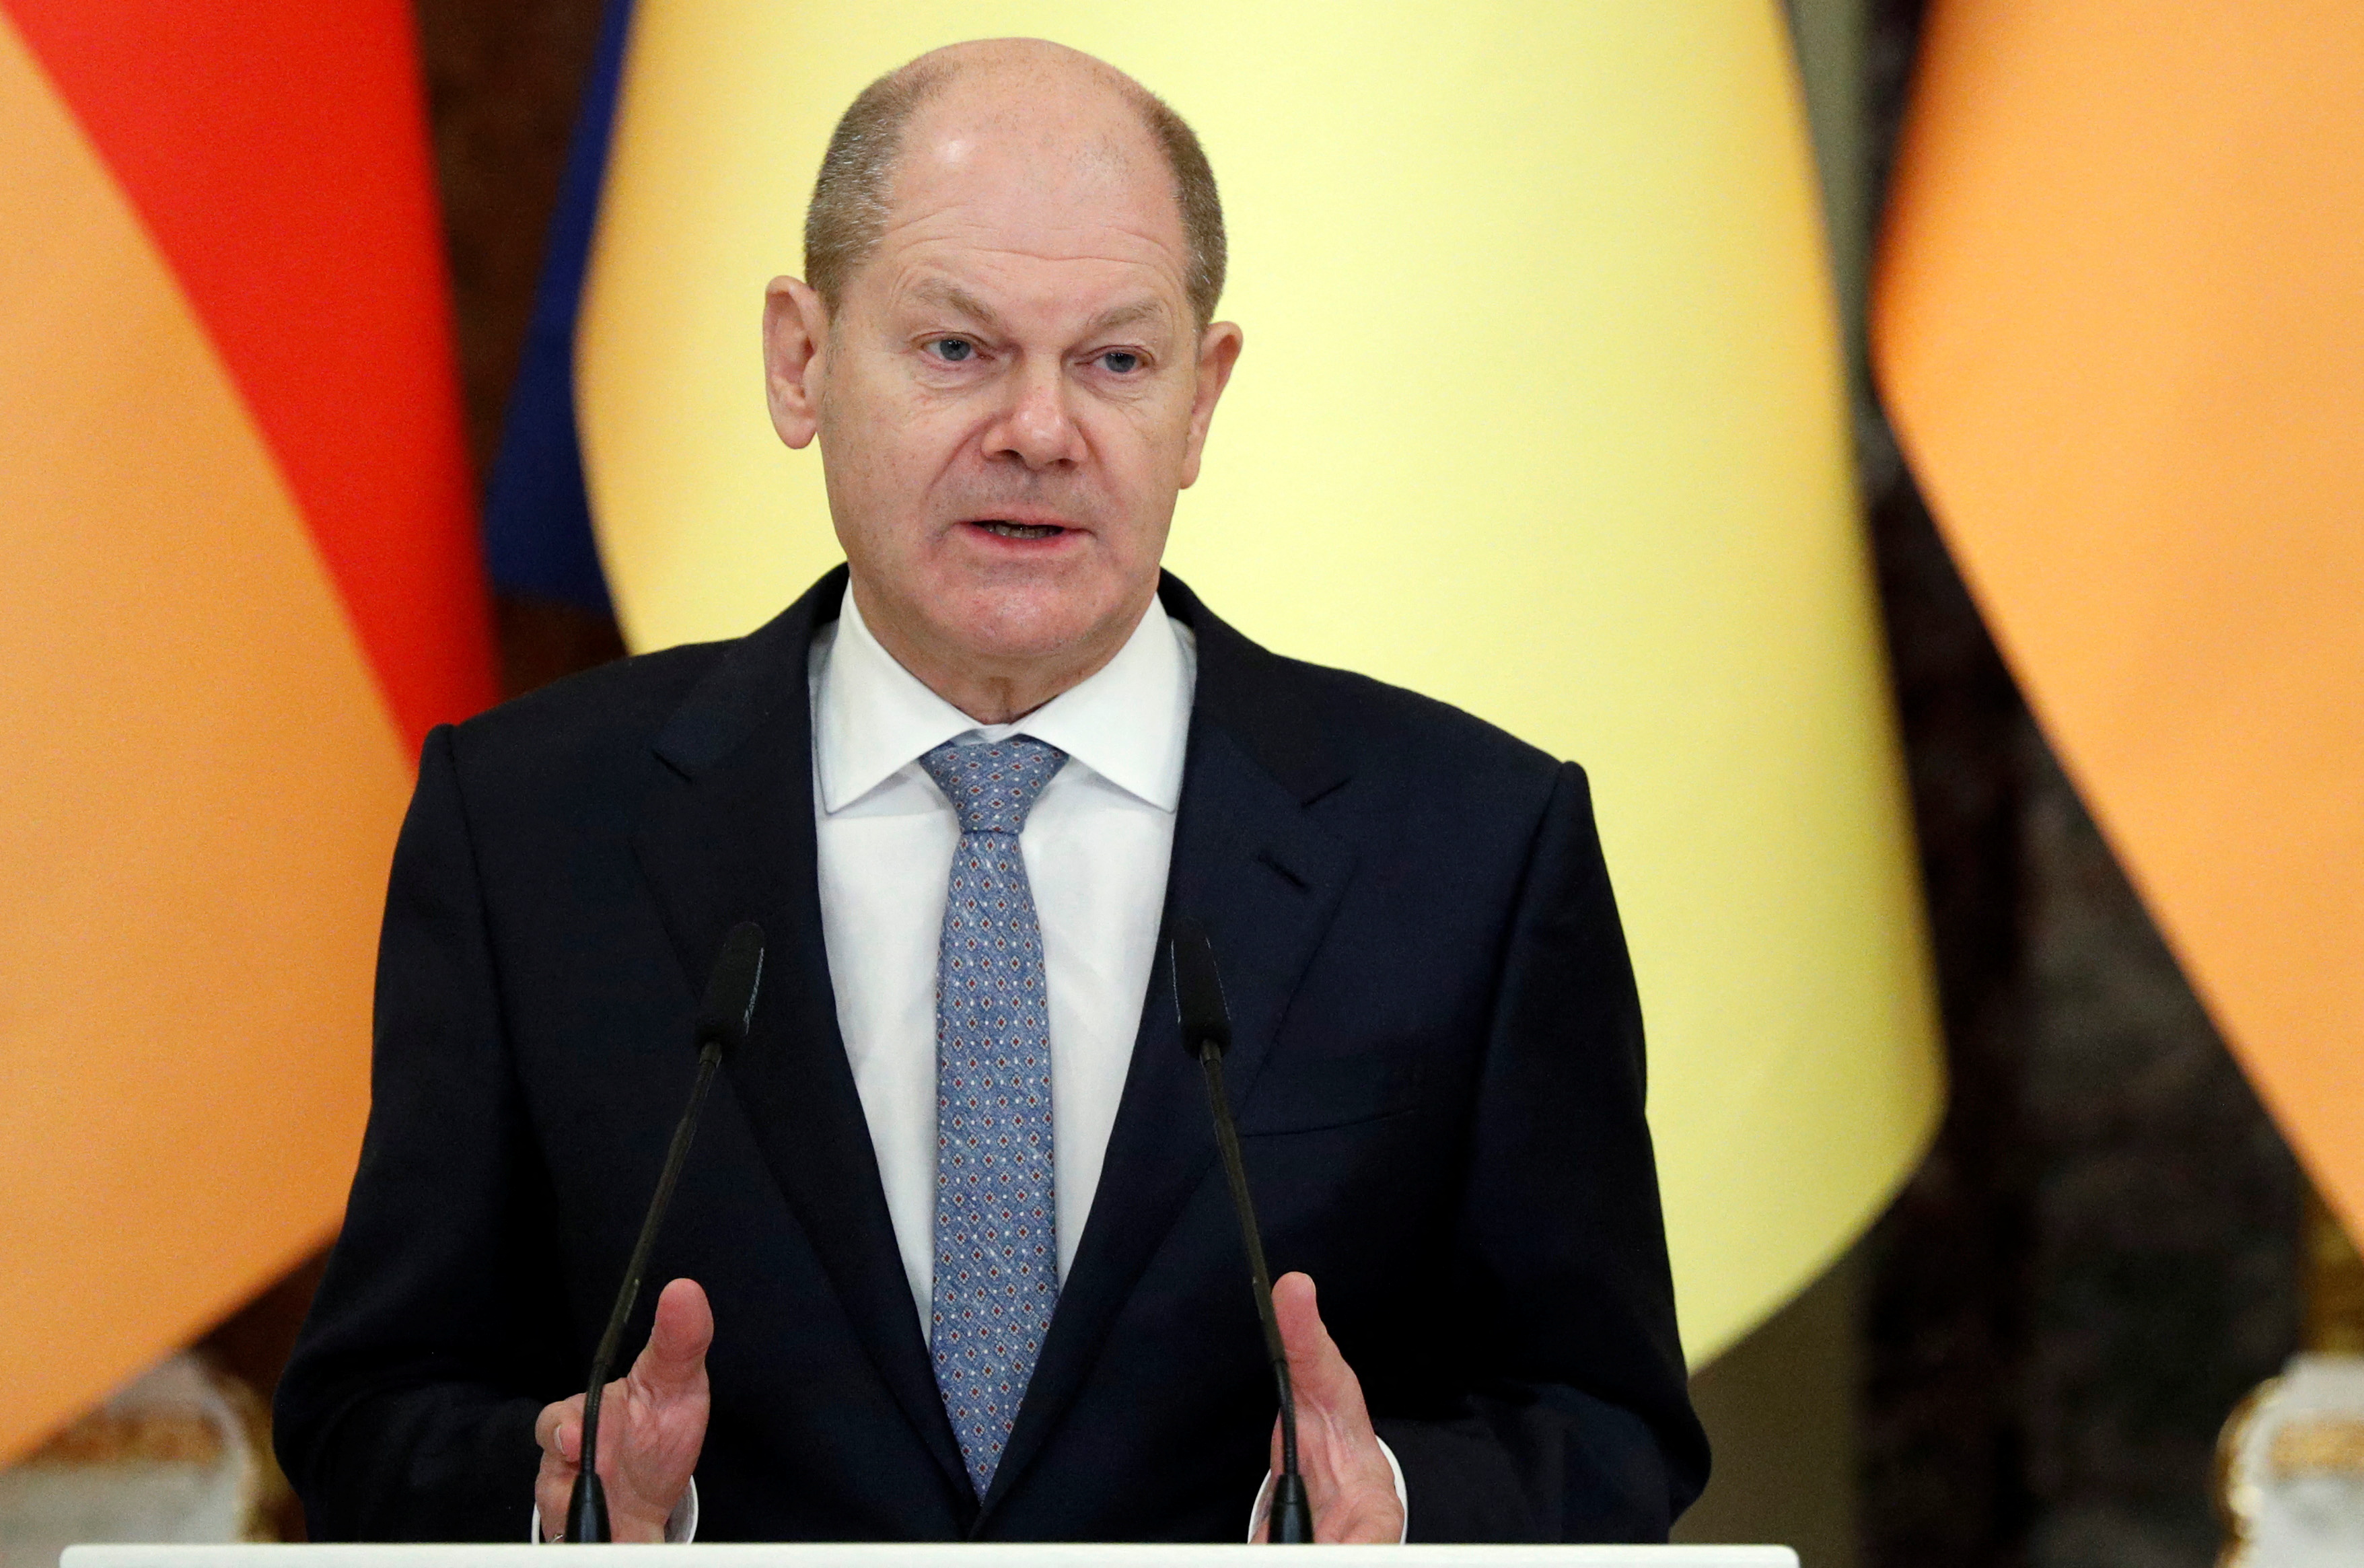 Germany is ready to discuss European security with Russia - Scholz | Reuters